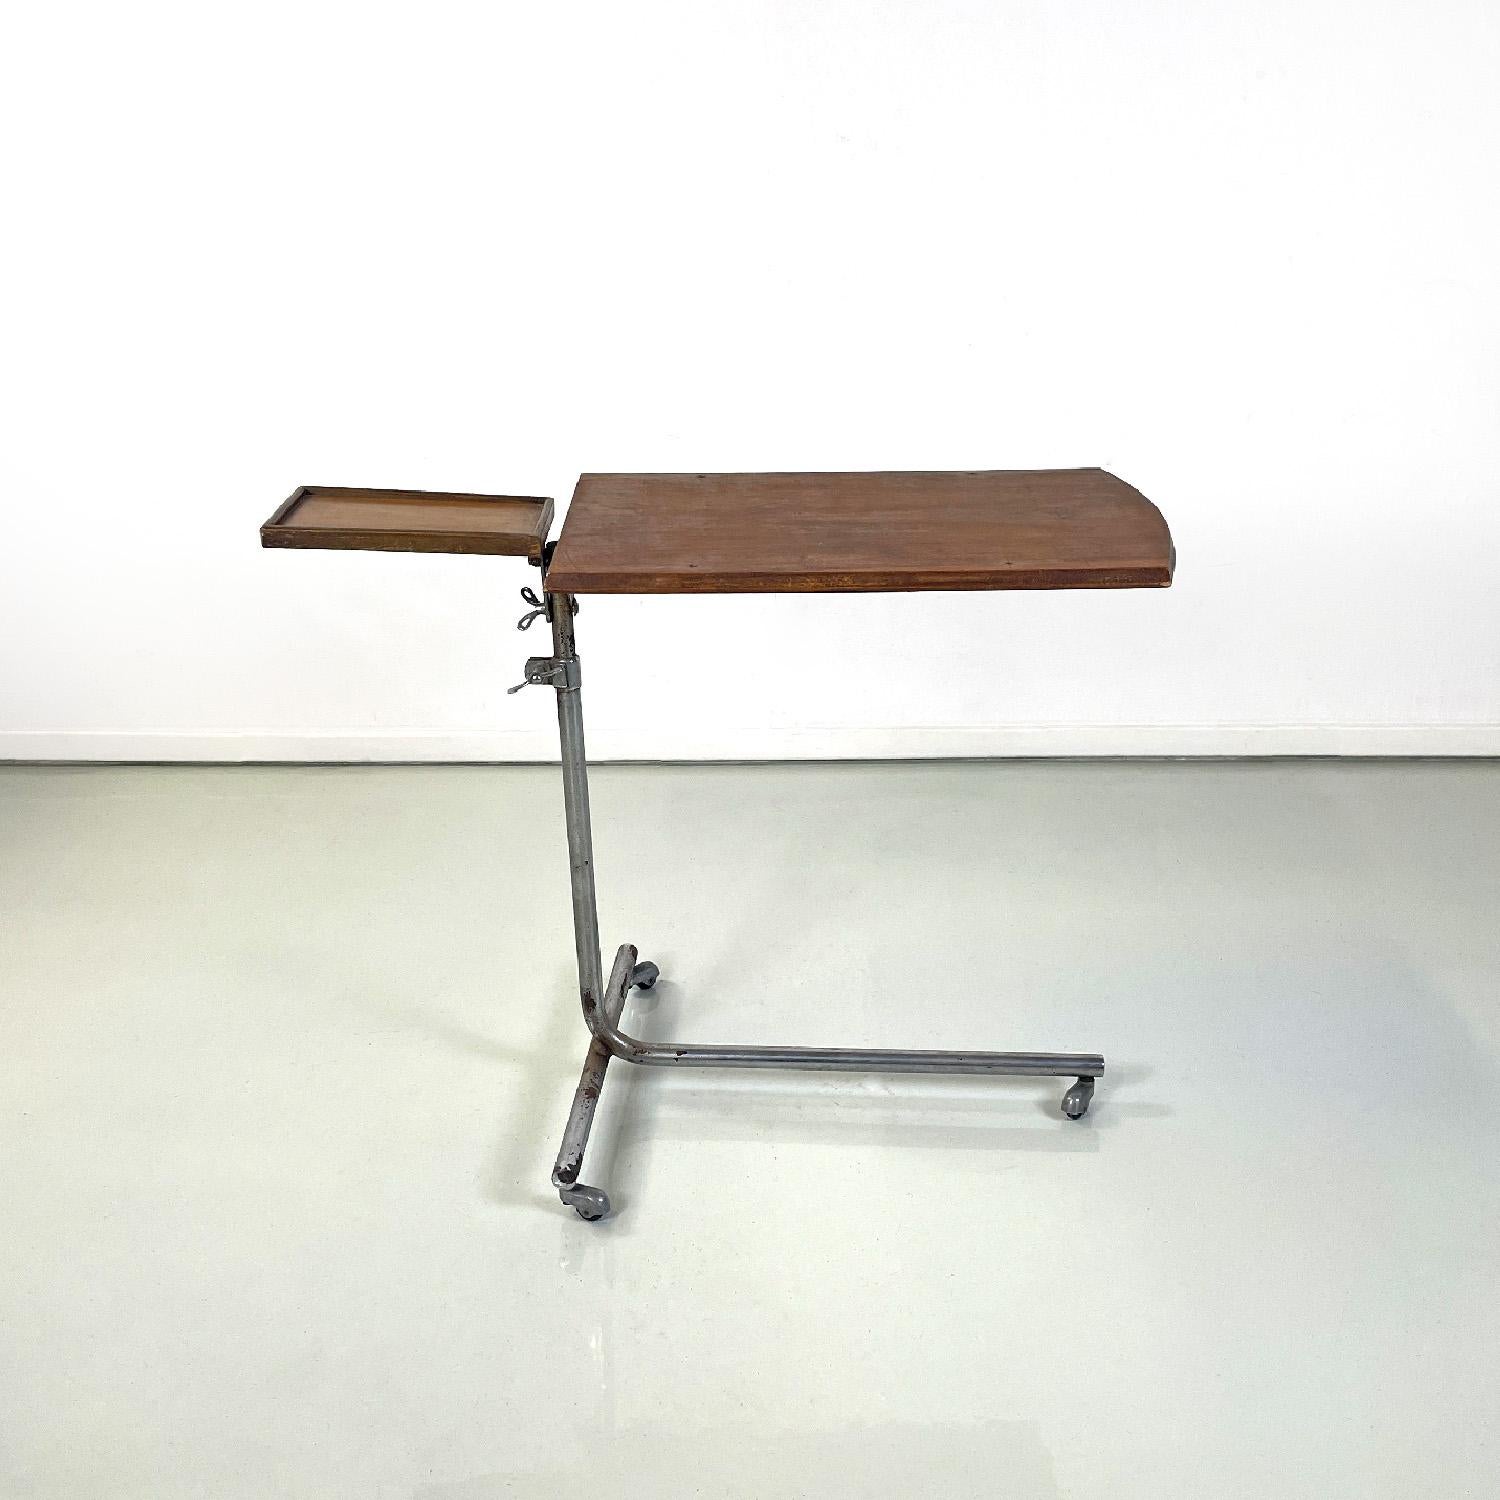 Italian mid-century modern wood and metal industrial work table, 1960s
Industrial work table with wooden top and small side tray top. The structure is made of tubular metal. The larger surface and the height of the table are directional and